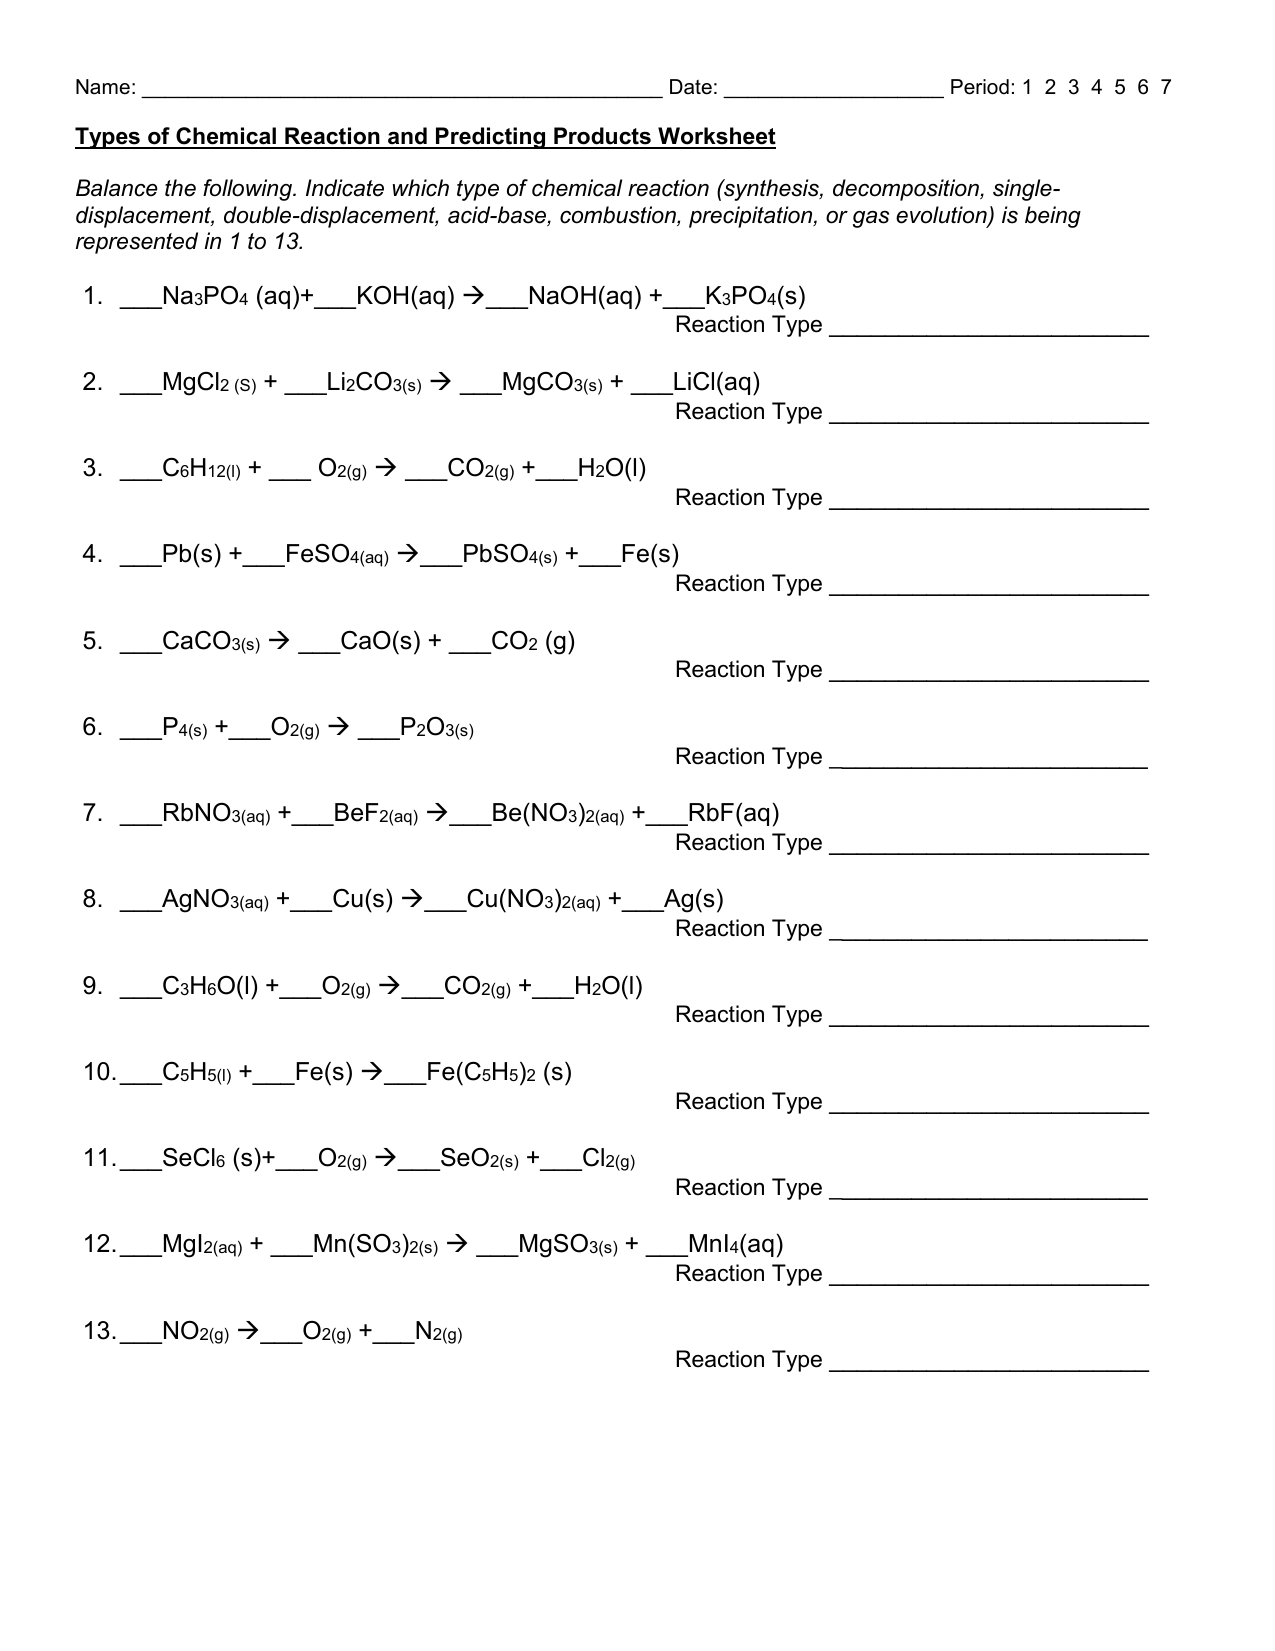 Types of Chemical Reaction and Predicting Products Worksheet With Chemical Reaction Type Worksheet